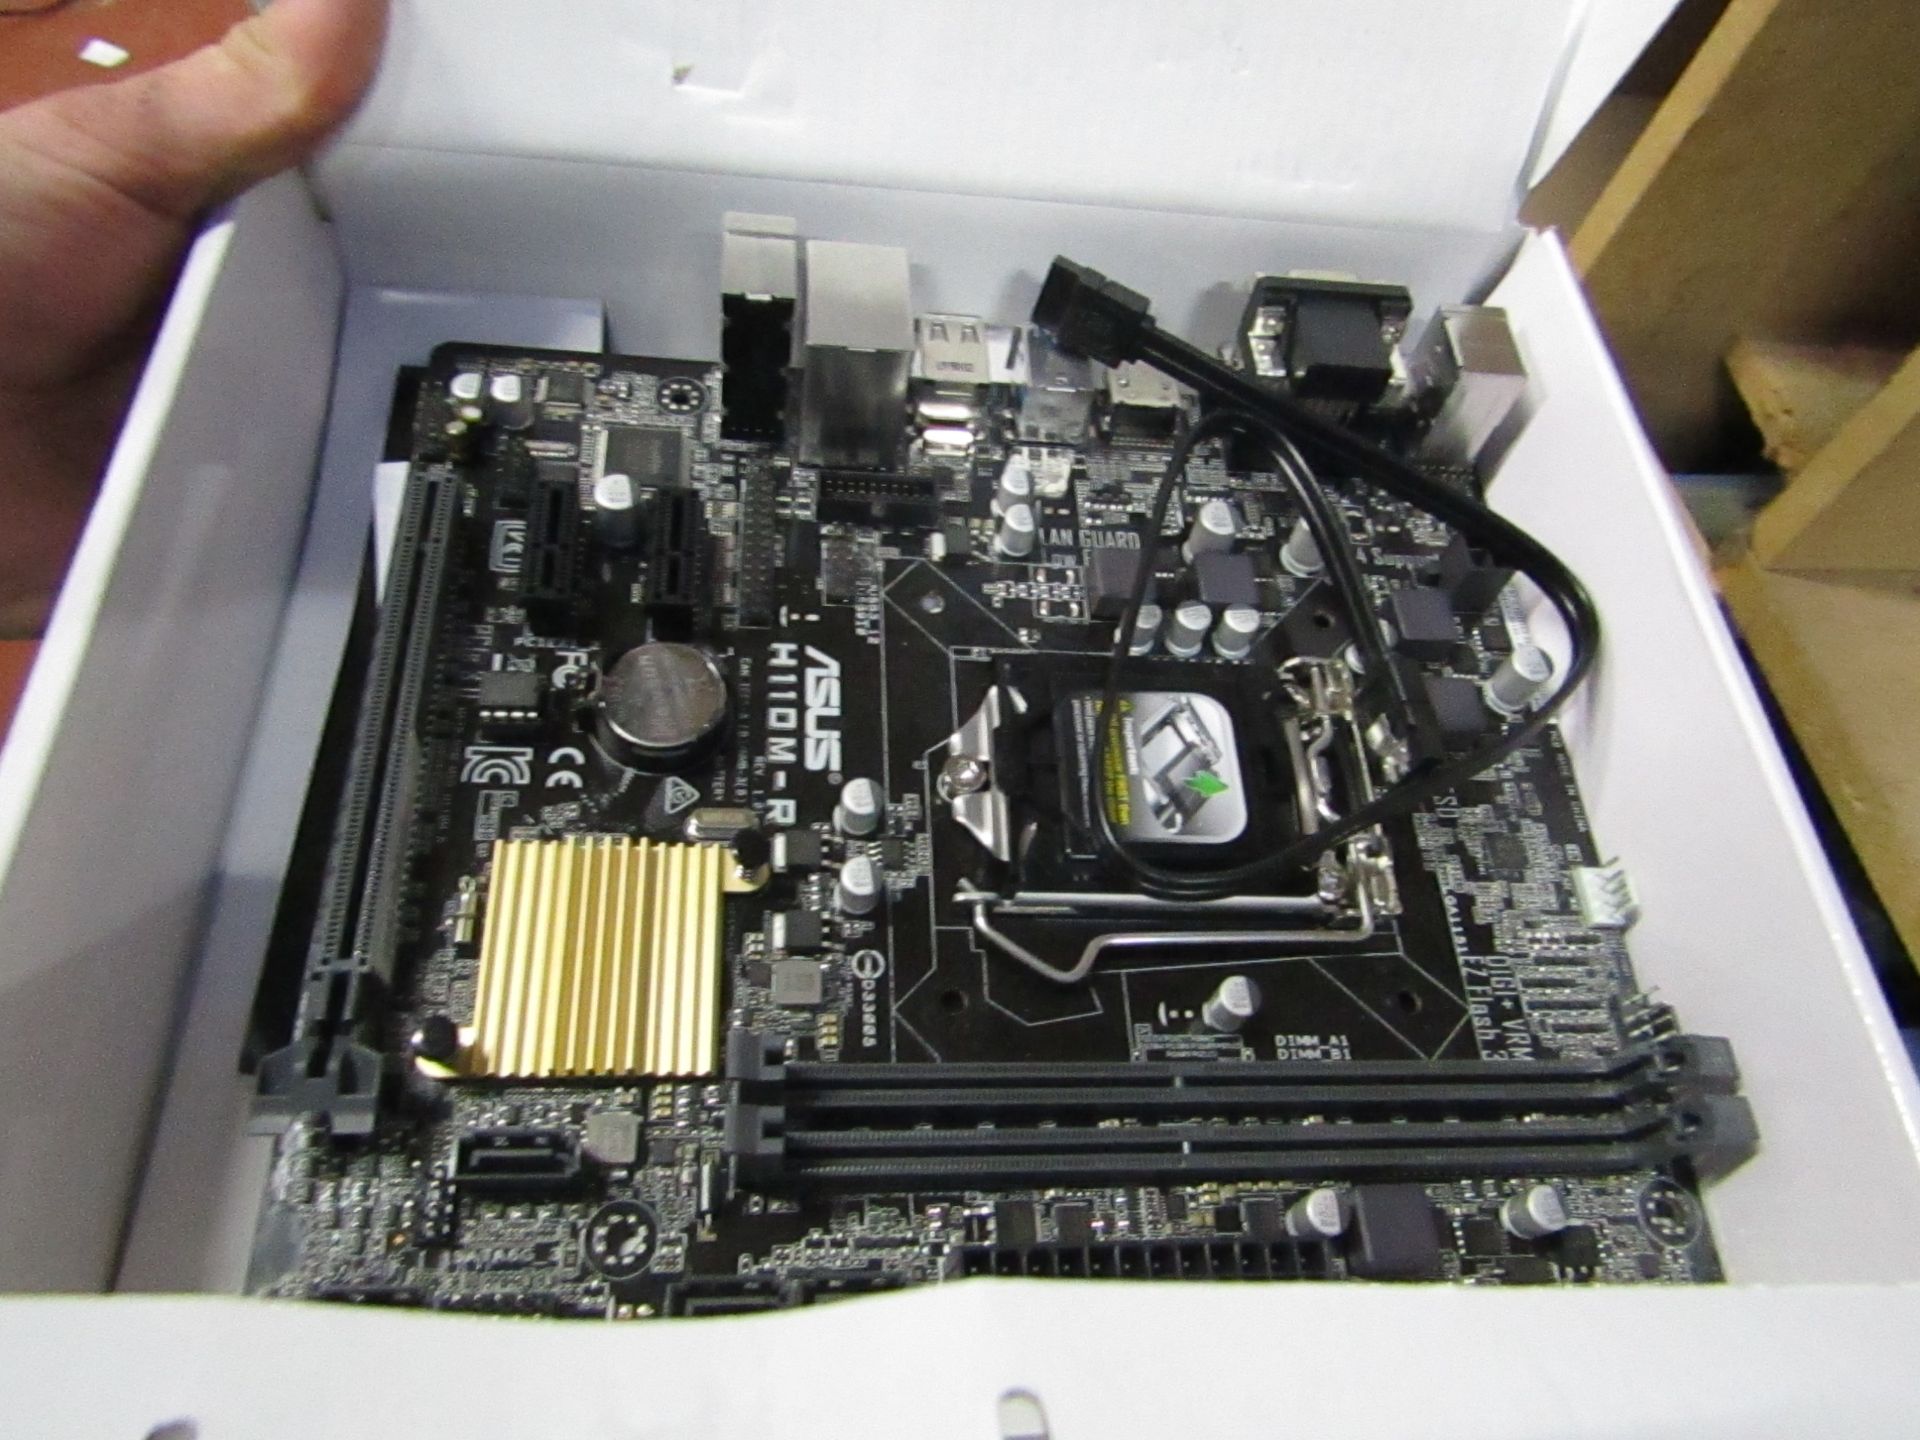 ASUS - Genuine parts - unsure to what content is - Boxed.